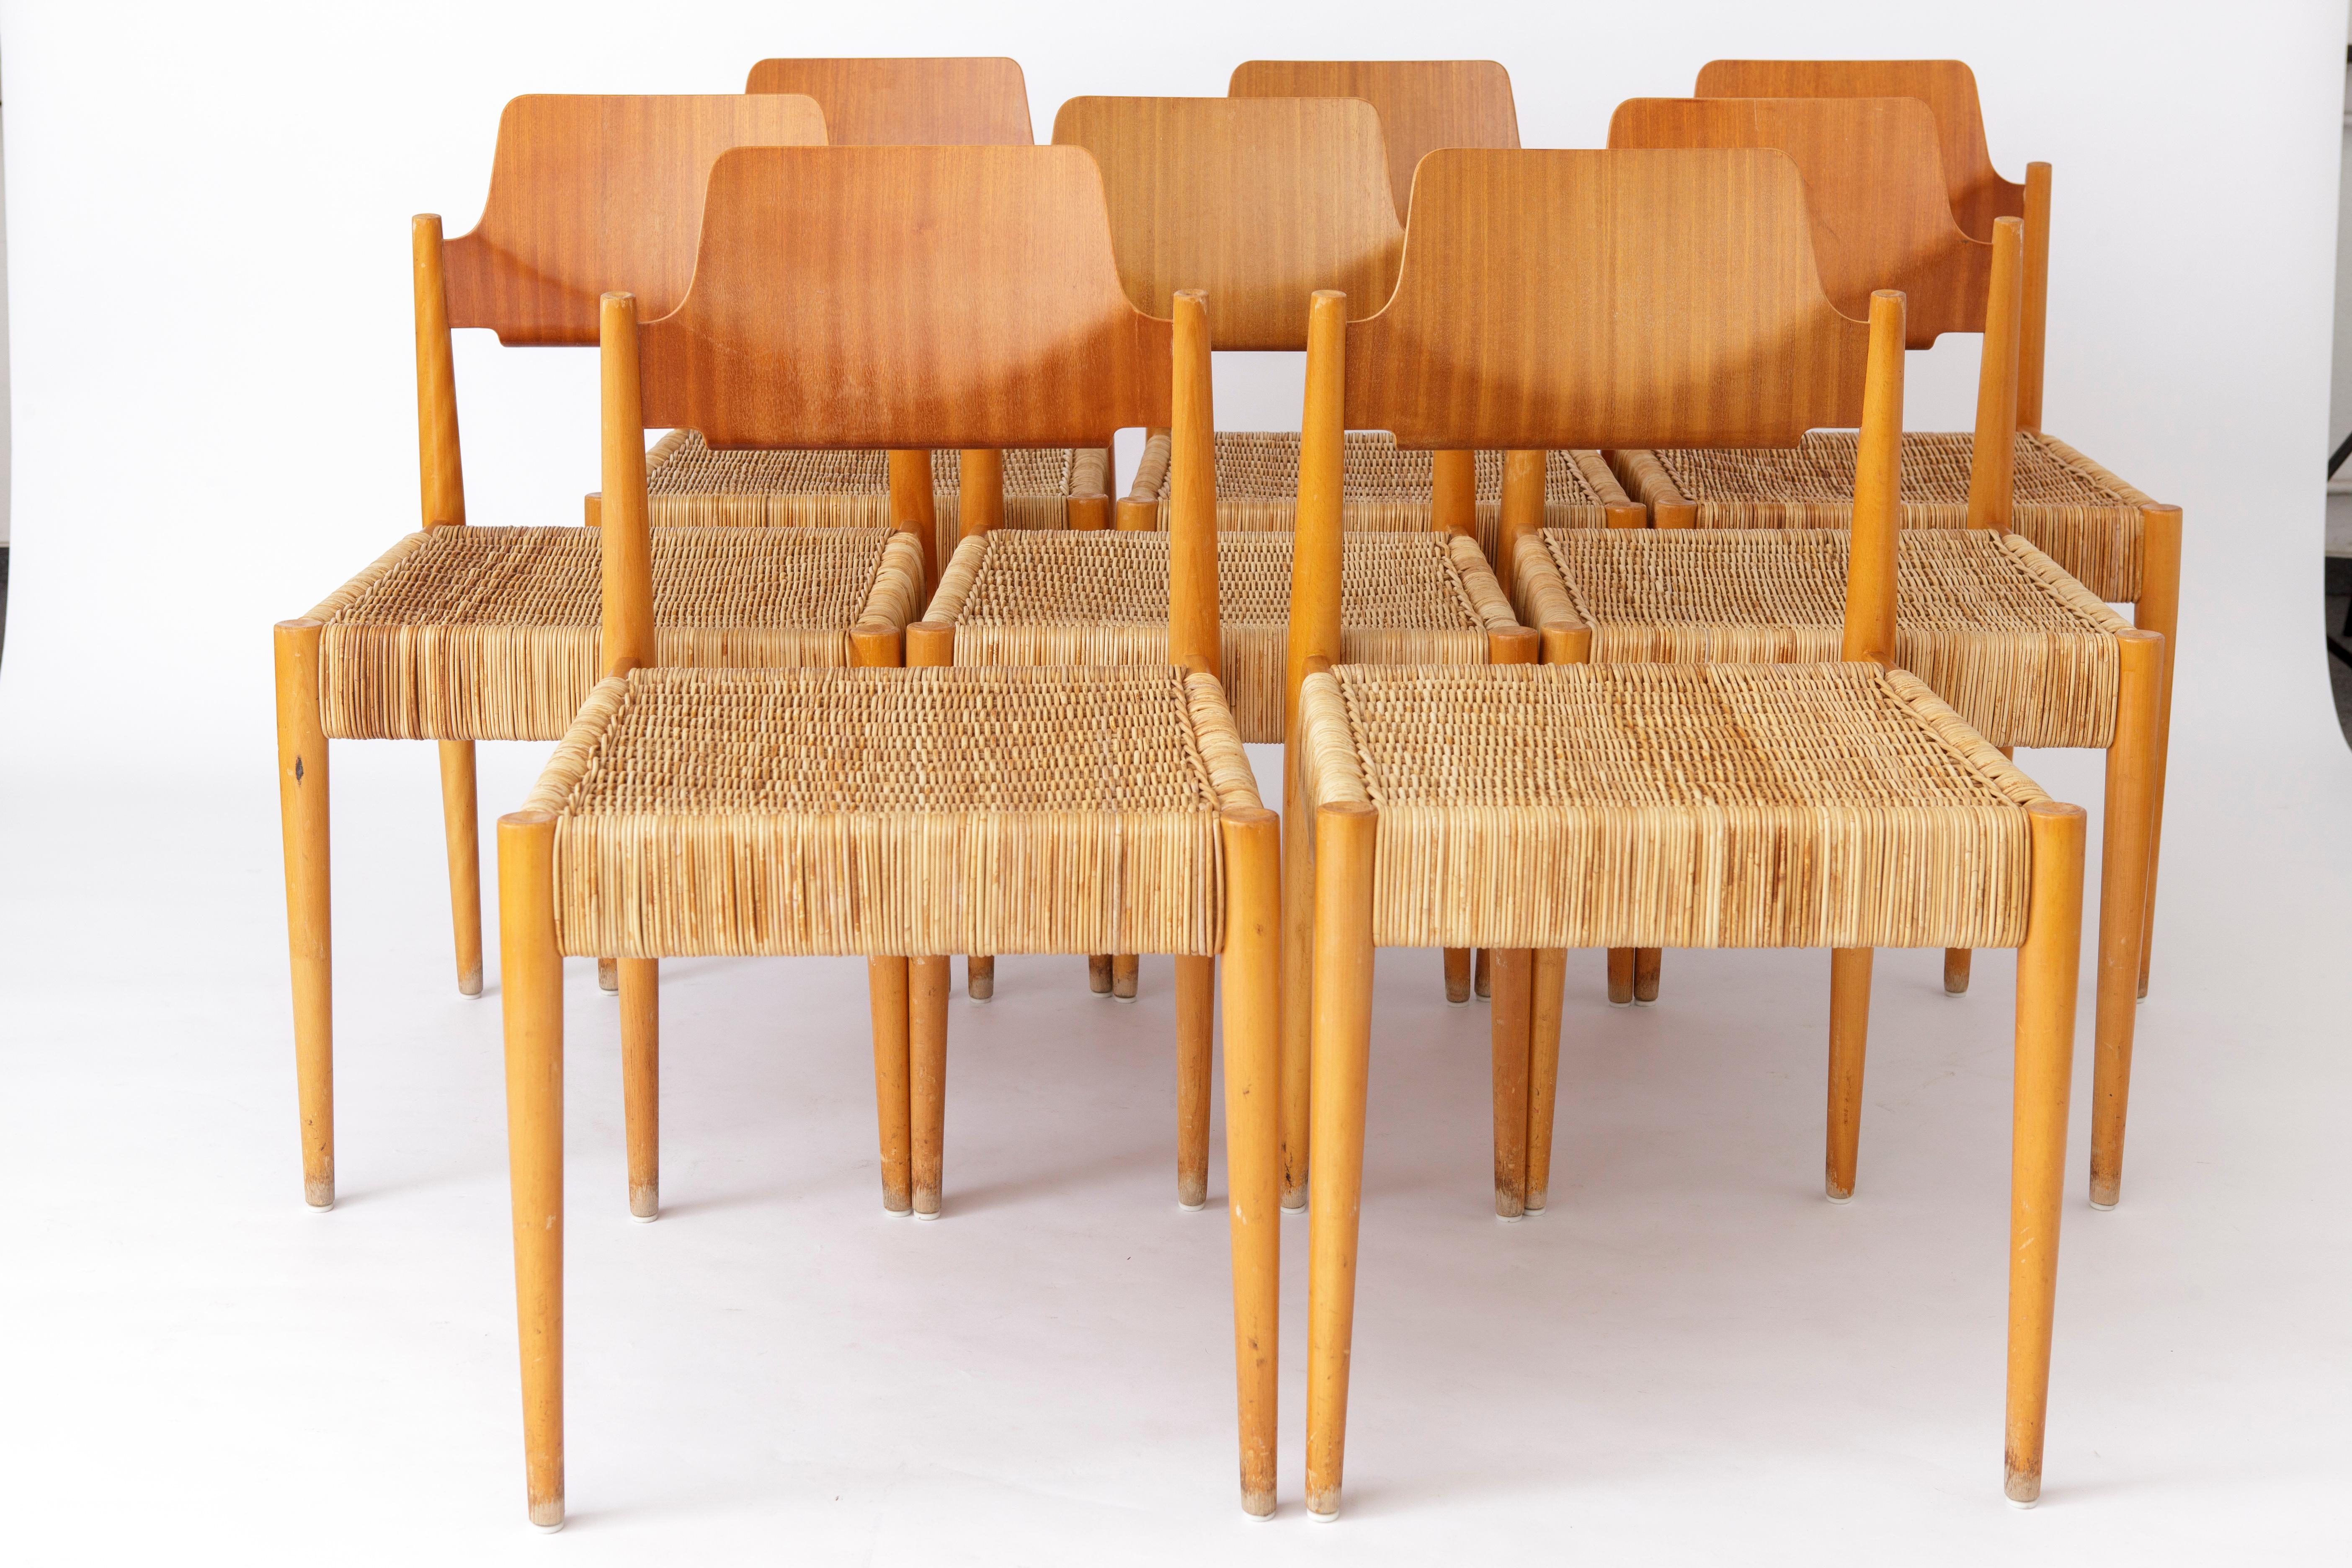 8 unique chairs from Germany Bauhaus designer Egon Eiermann for the manufacturer Wilde + Spieth. 
Model: SE19 from 1953. 
The chairs were used in an old church and have a shelf in the back for a hymnal. 
Beech wood frame in good stable condition, as